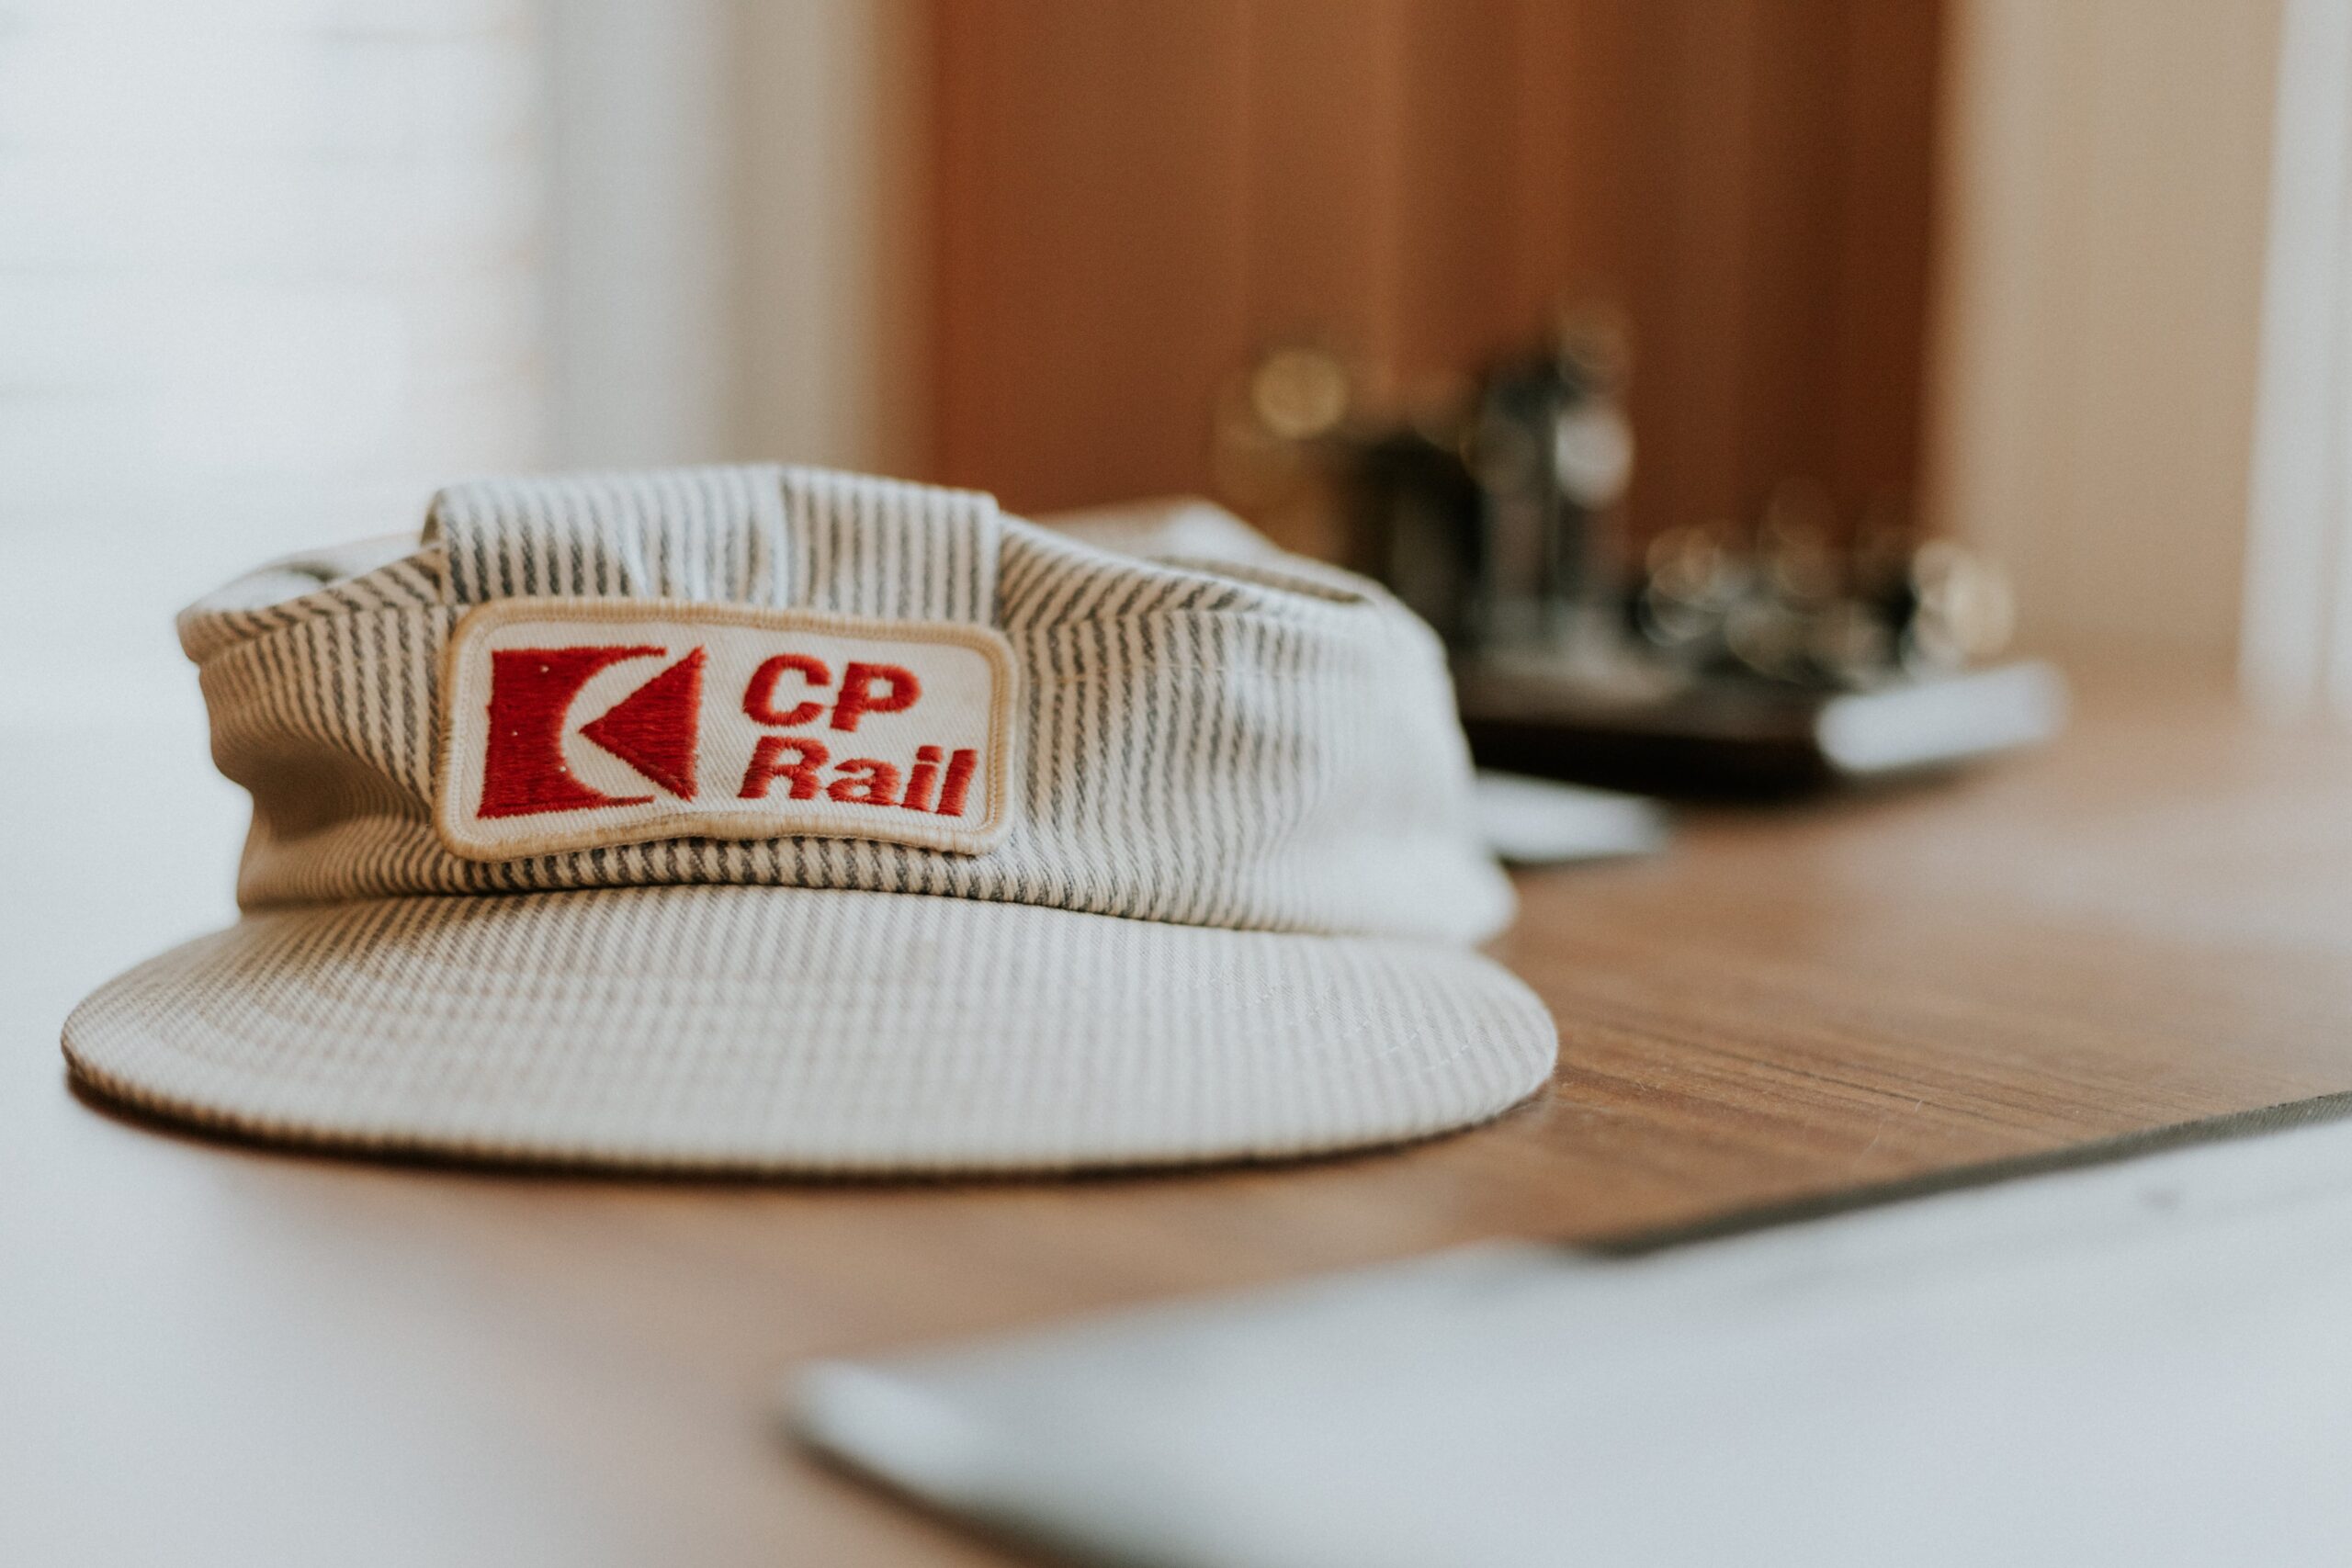 A train conductor's hat, sitting on a desk.